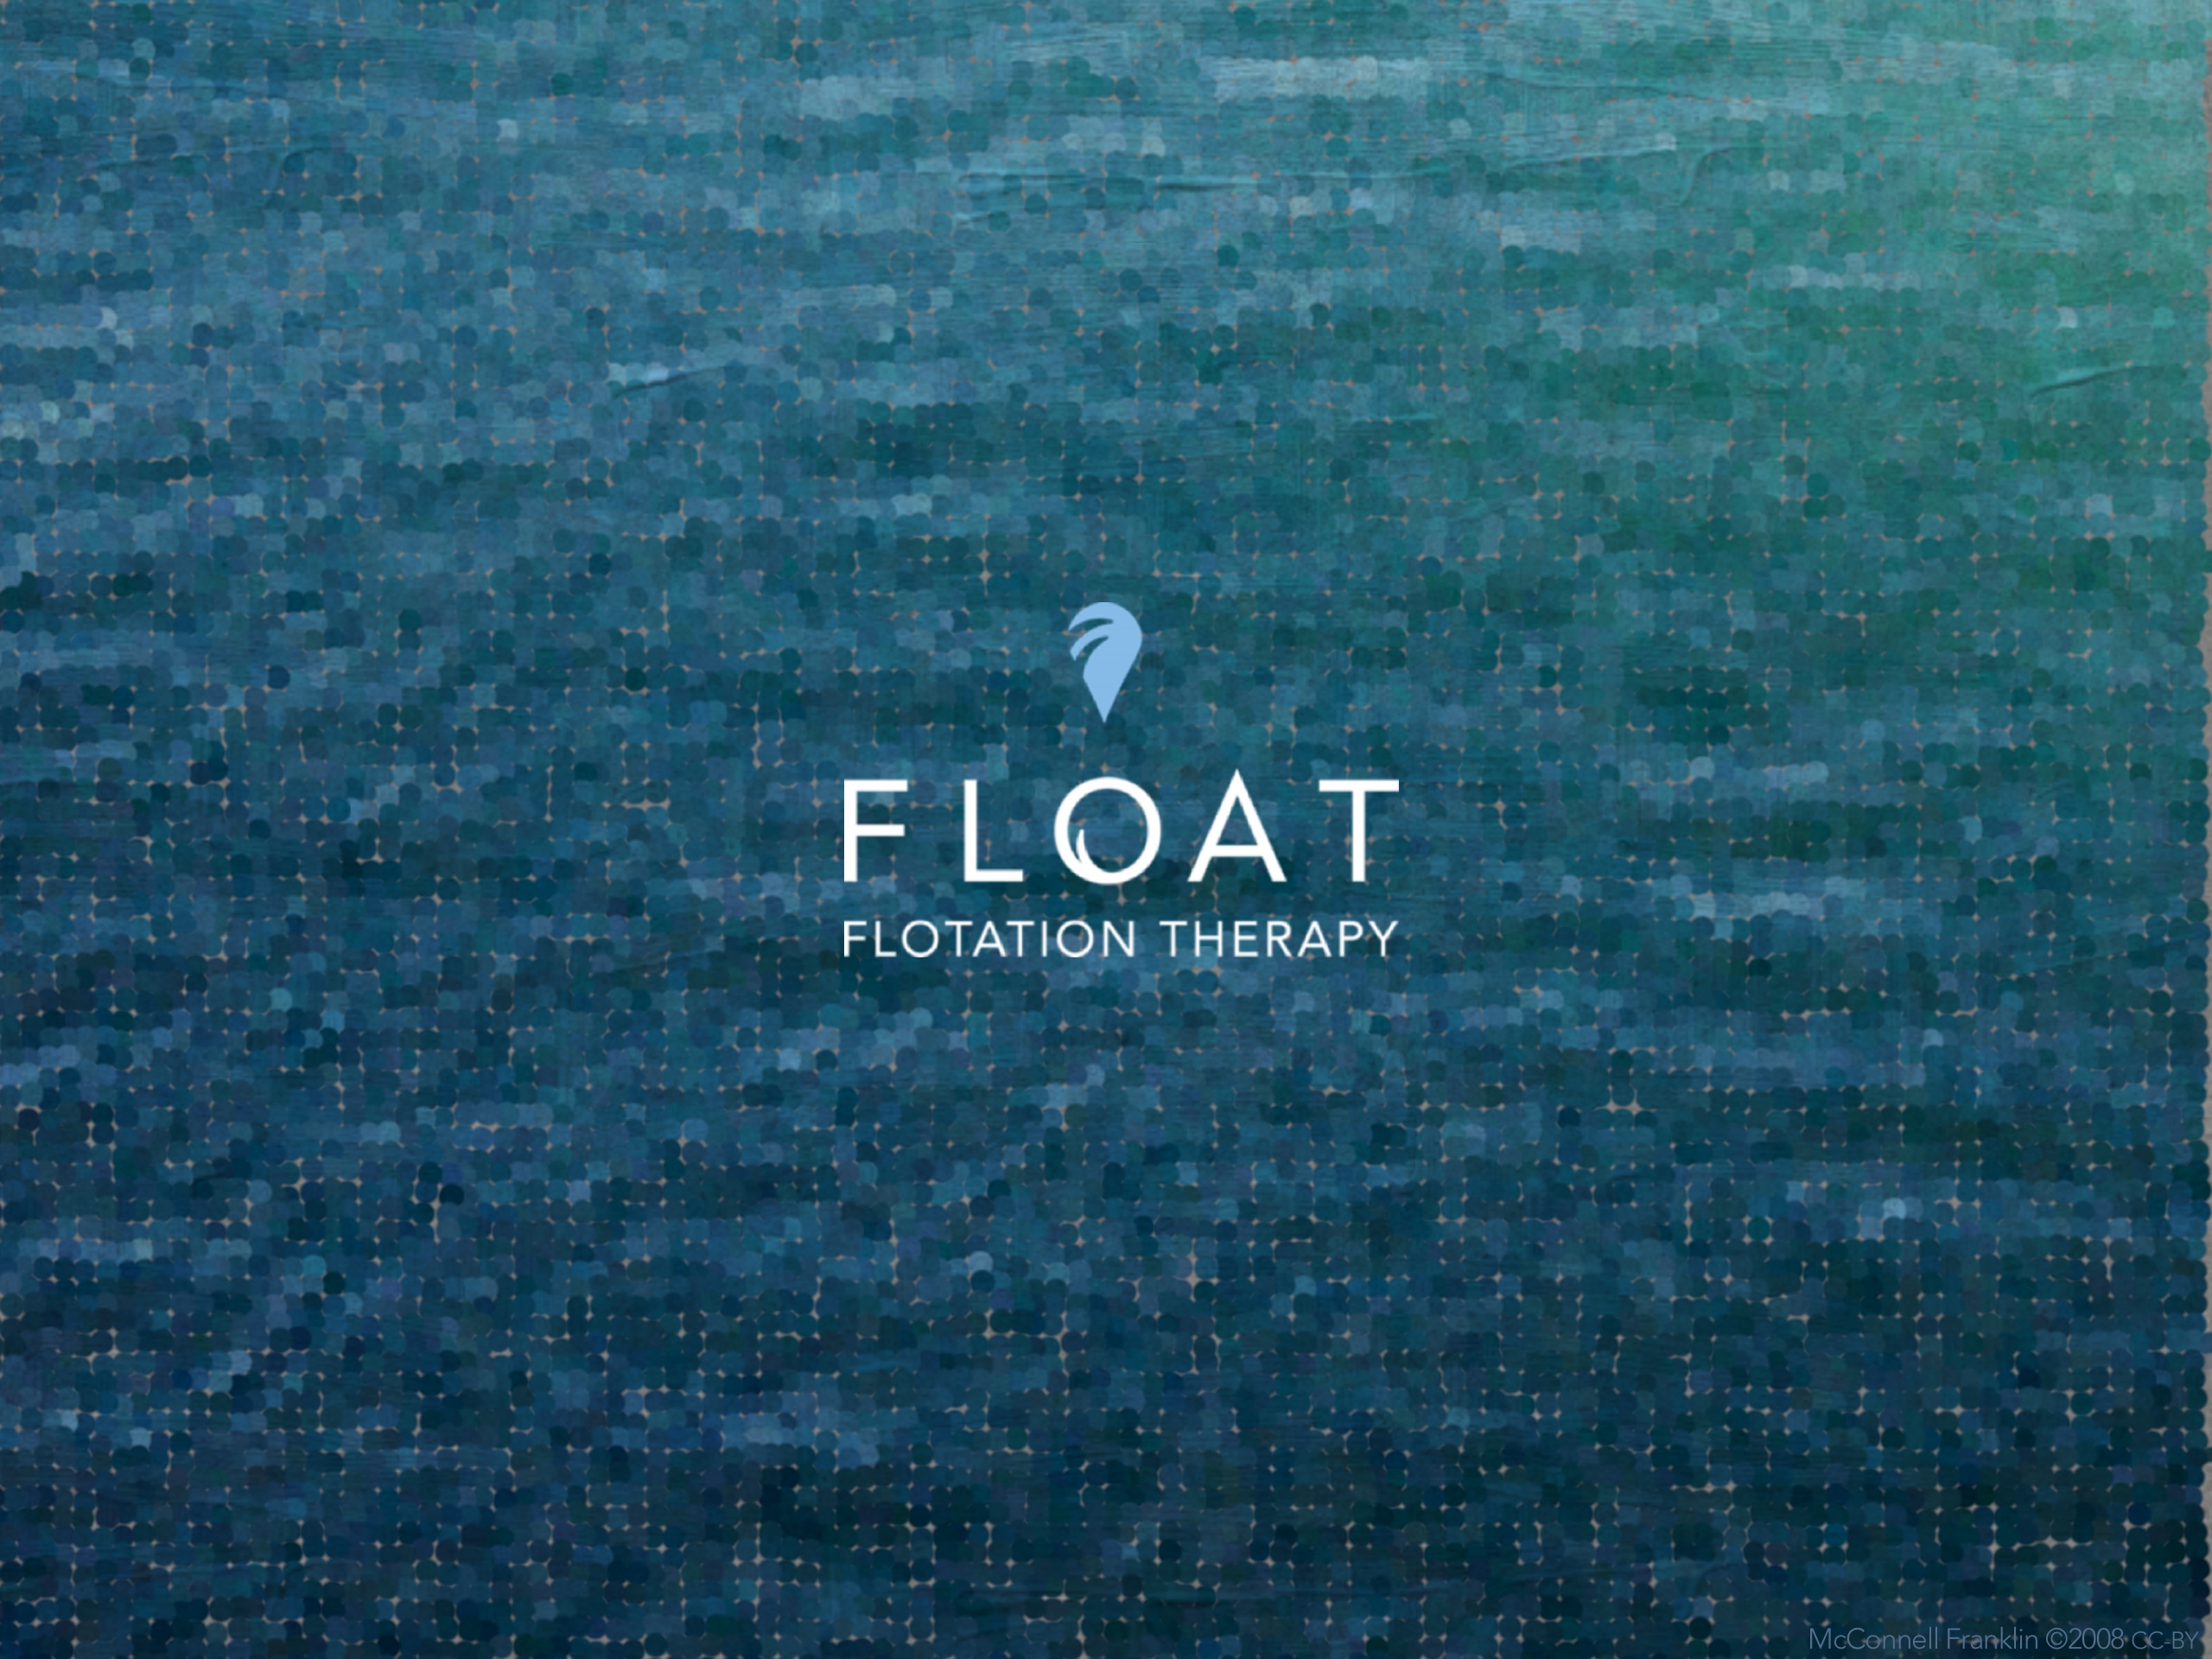 Backer Wallpaper Float Flotation Therapy A Center For Boston